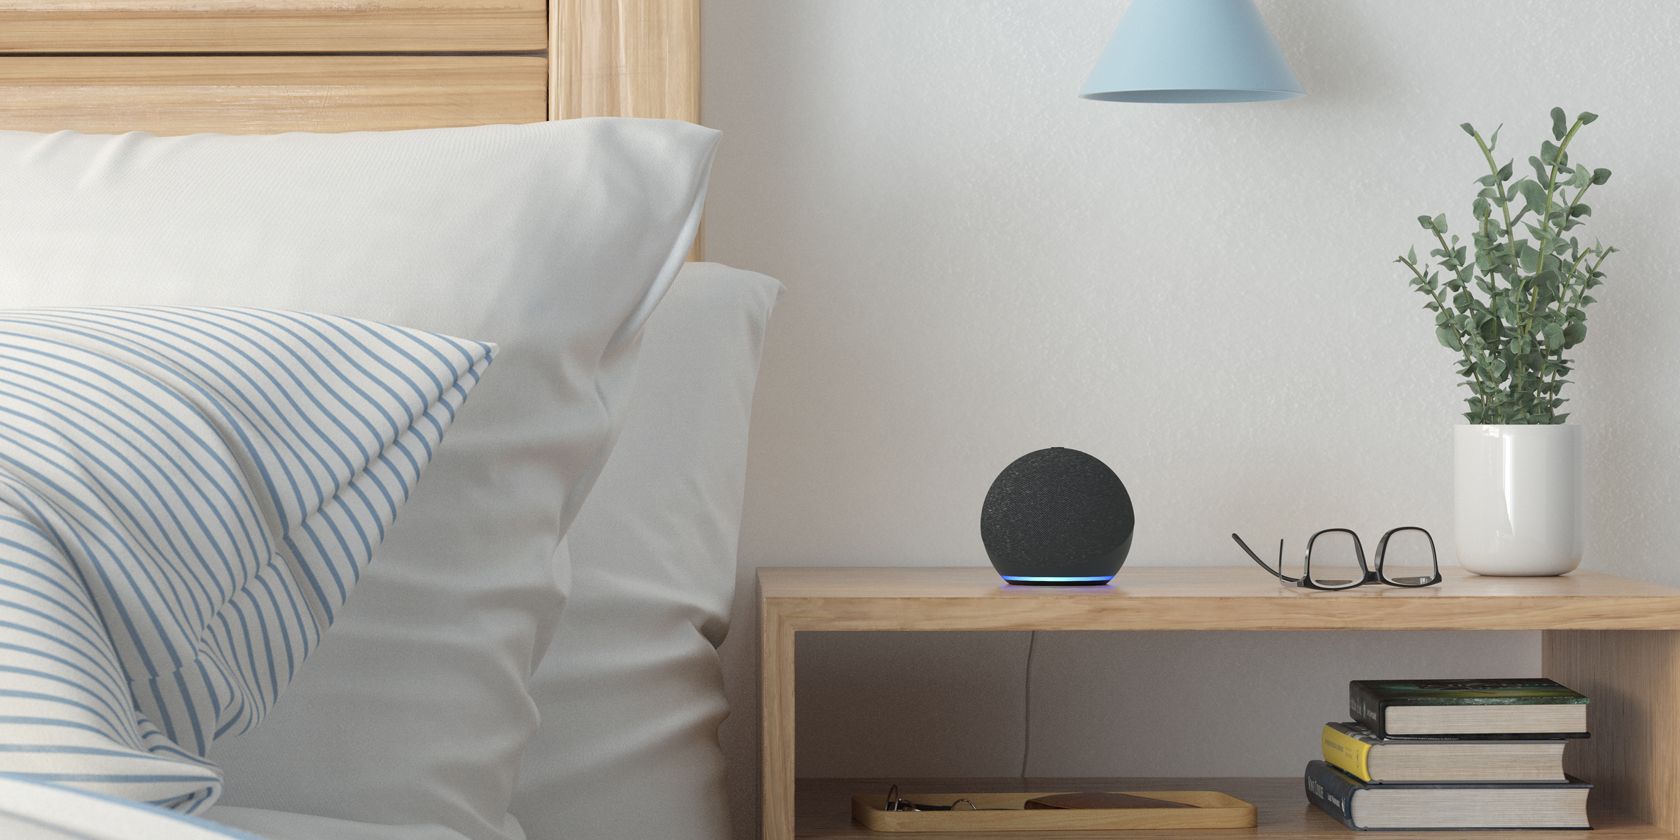 Amazon Echo Dot by bed